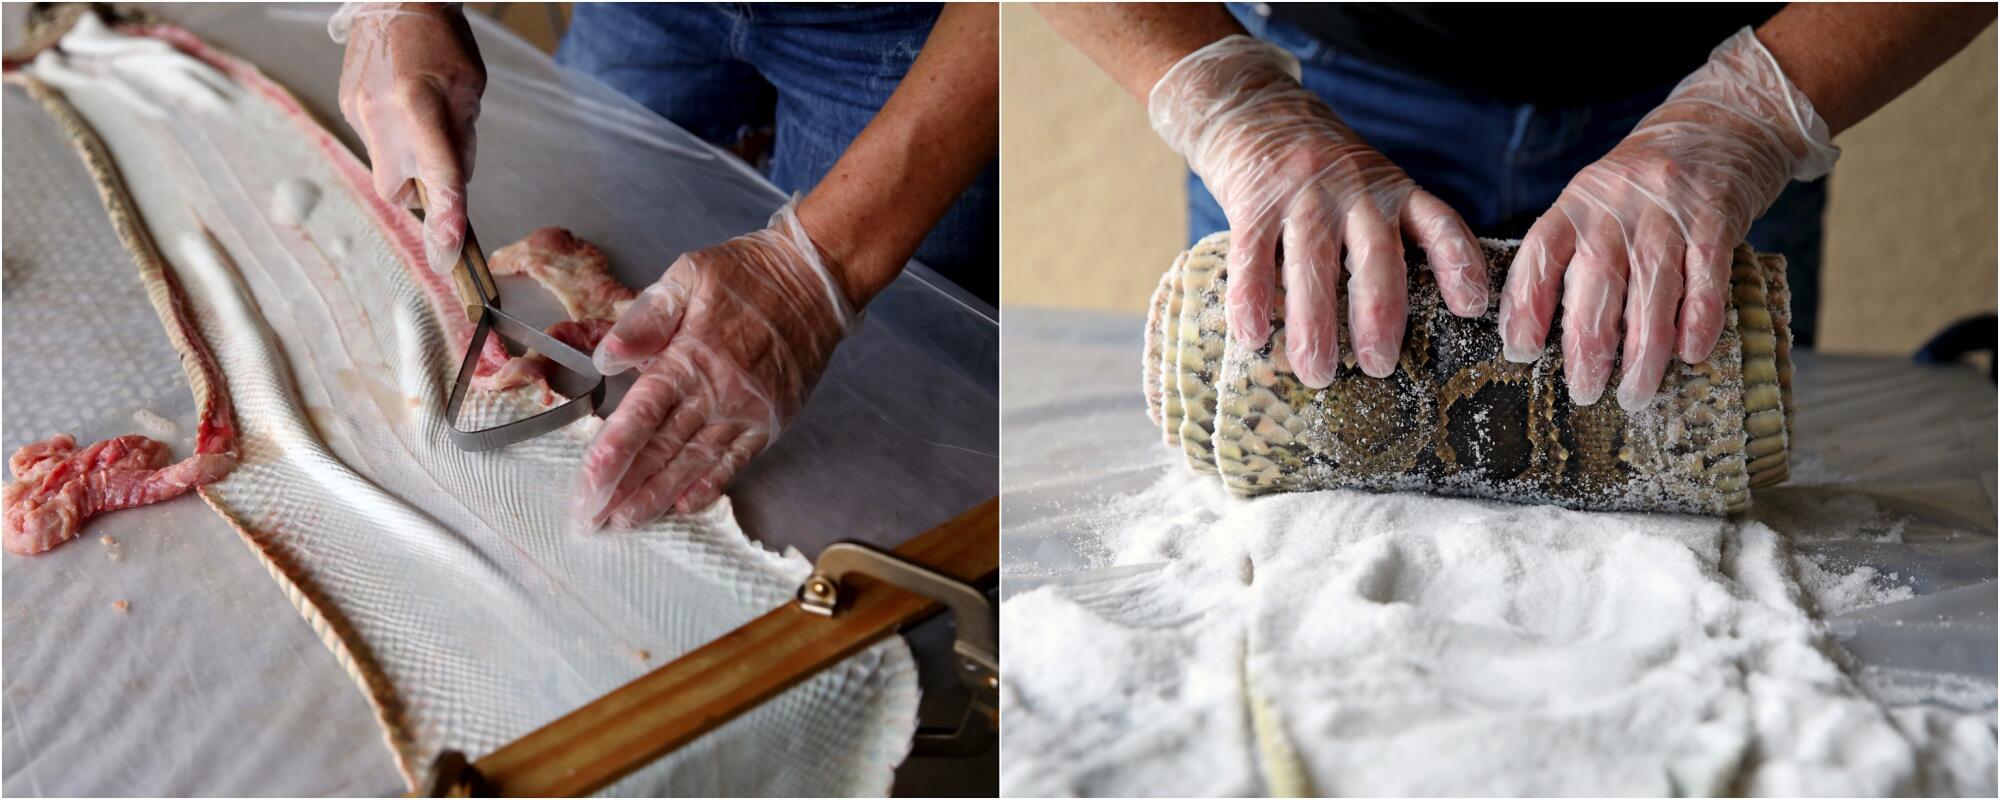 A woman, left, removes the flesh from a python skin. Right, she salts a python skin.